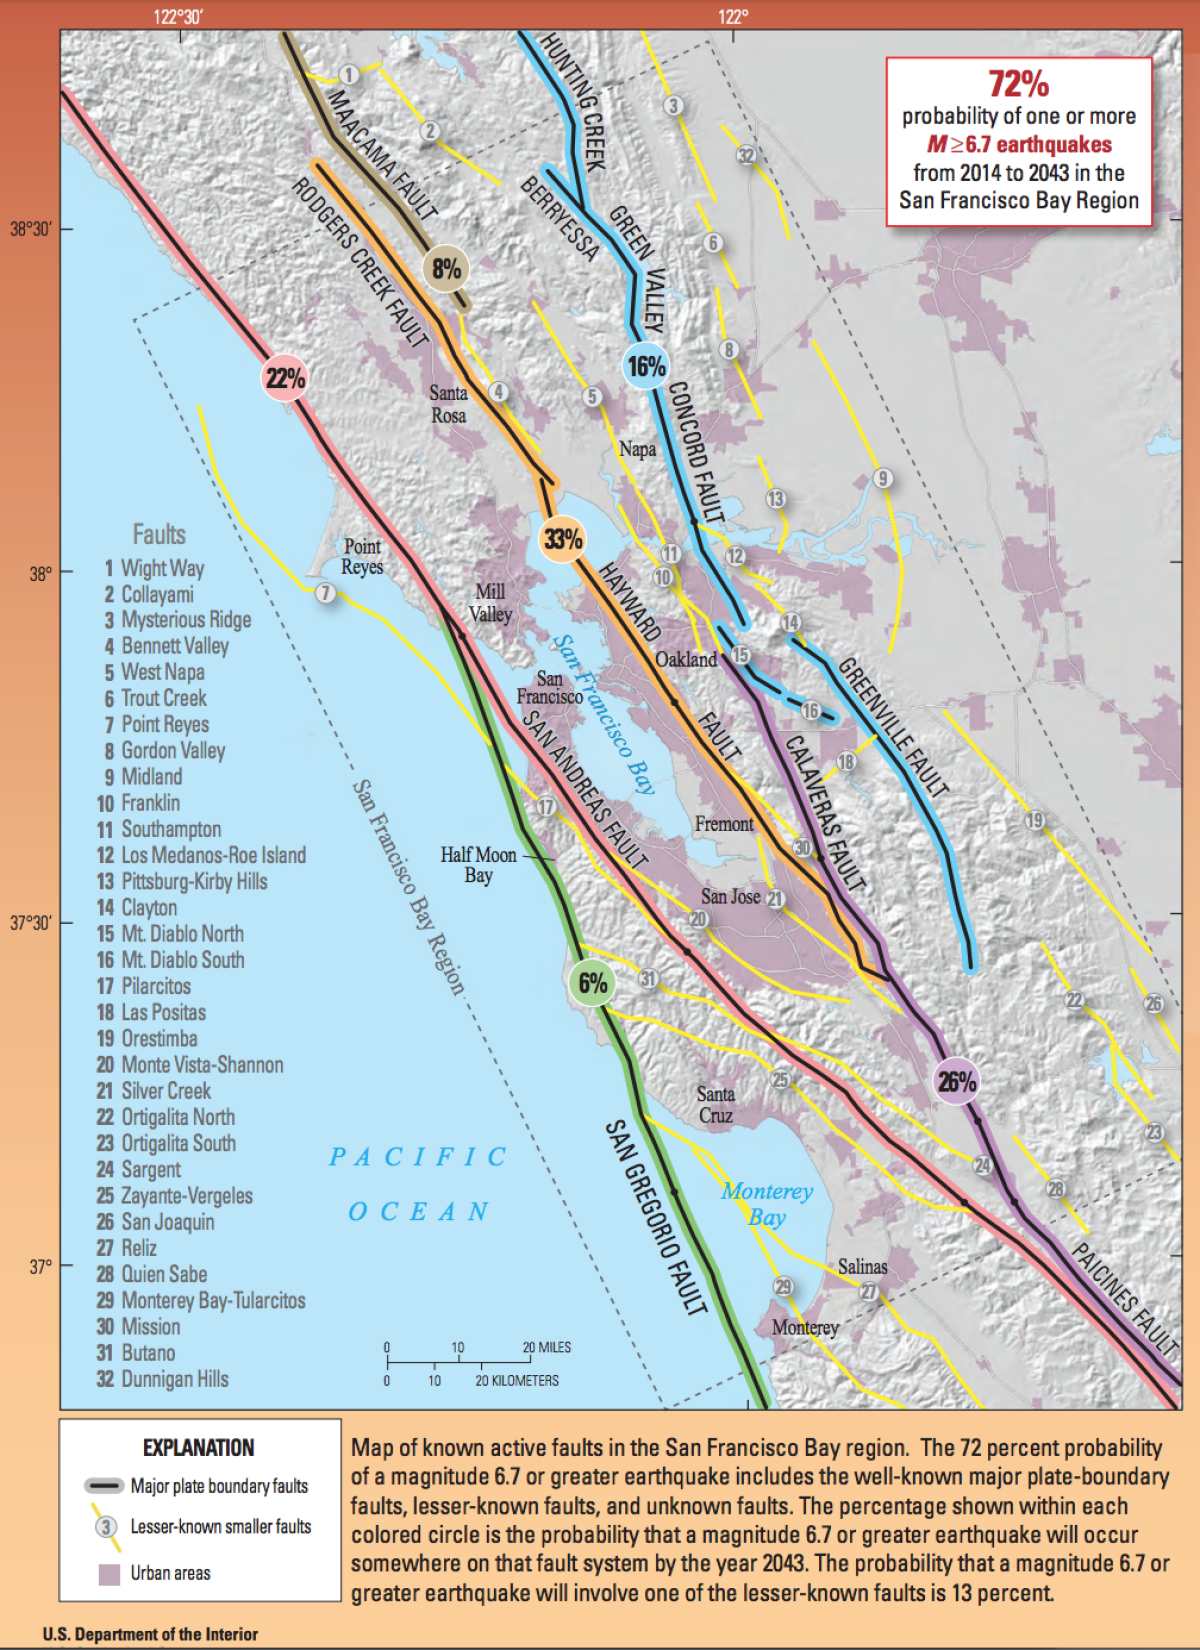 A map of the Bay Area's major earthquake faults. Generally speaking, there are seven major fault zones in the region: the Calaveras, Concord-Green Valley, Greenville, Hayward, Rodgers Creek, San Andreas and San Gregorio.